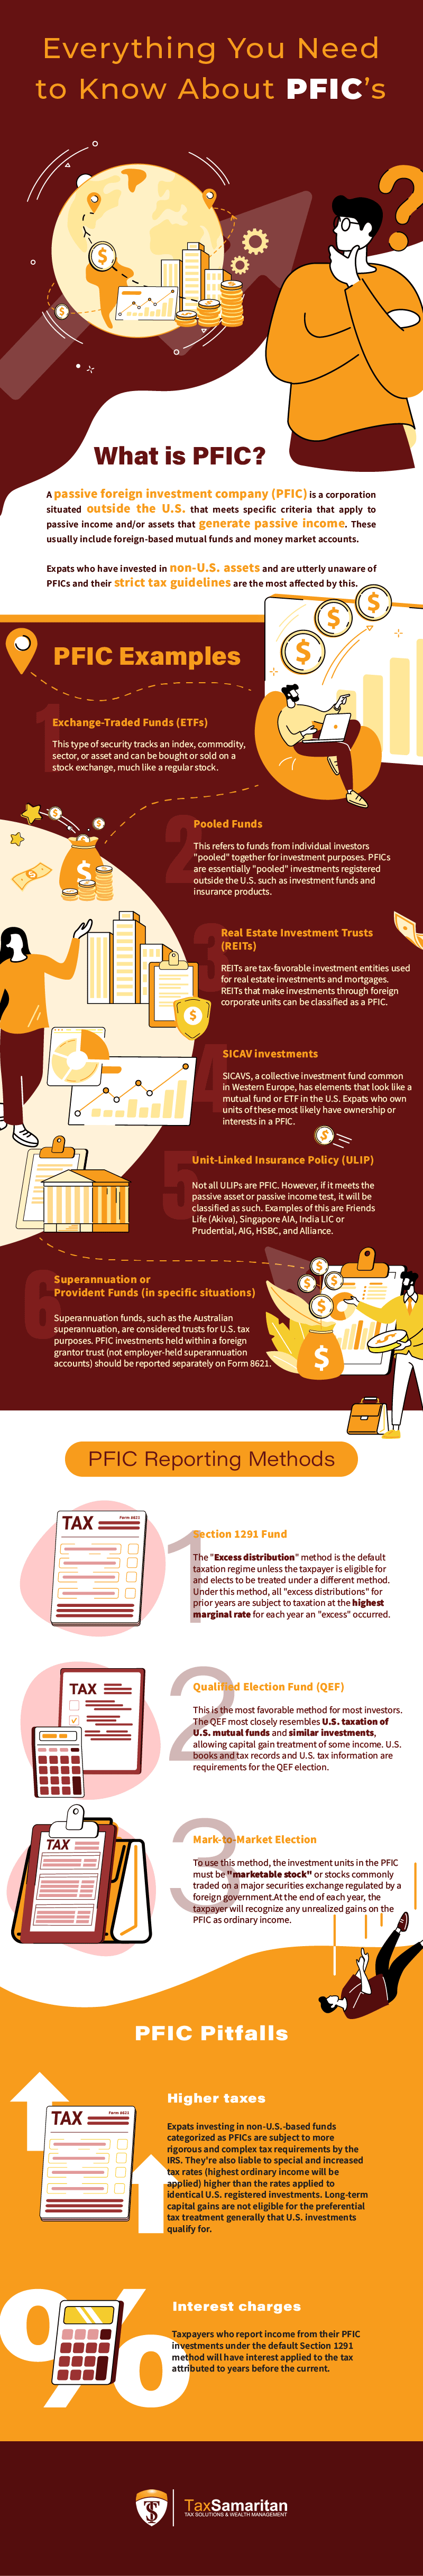 [Infographic] Everything You Need to Know About PFIC’s